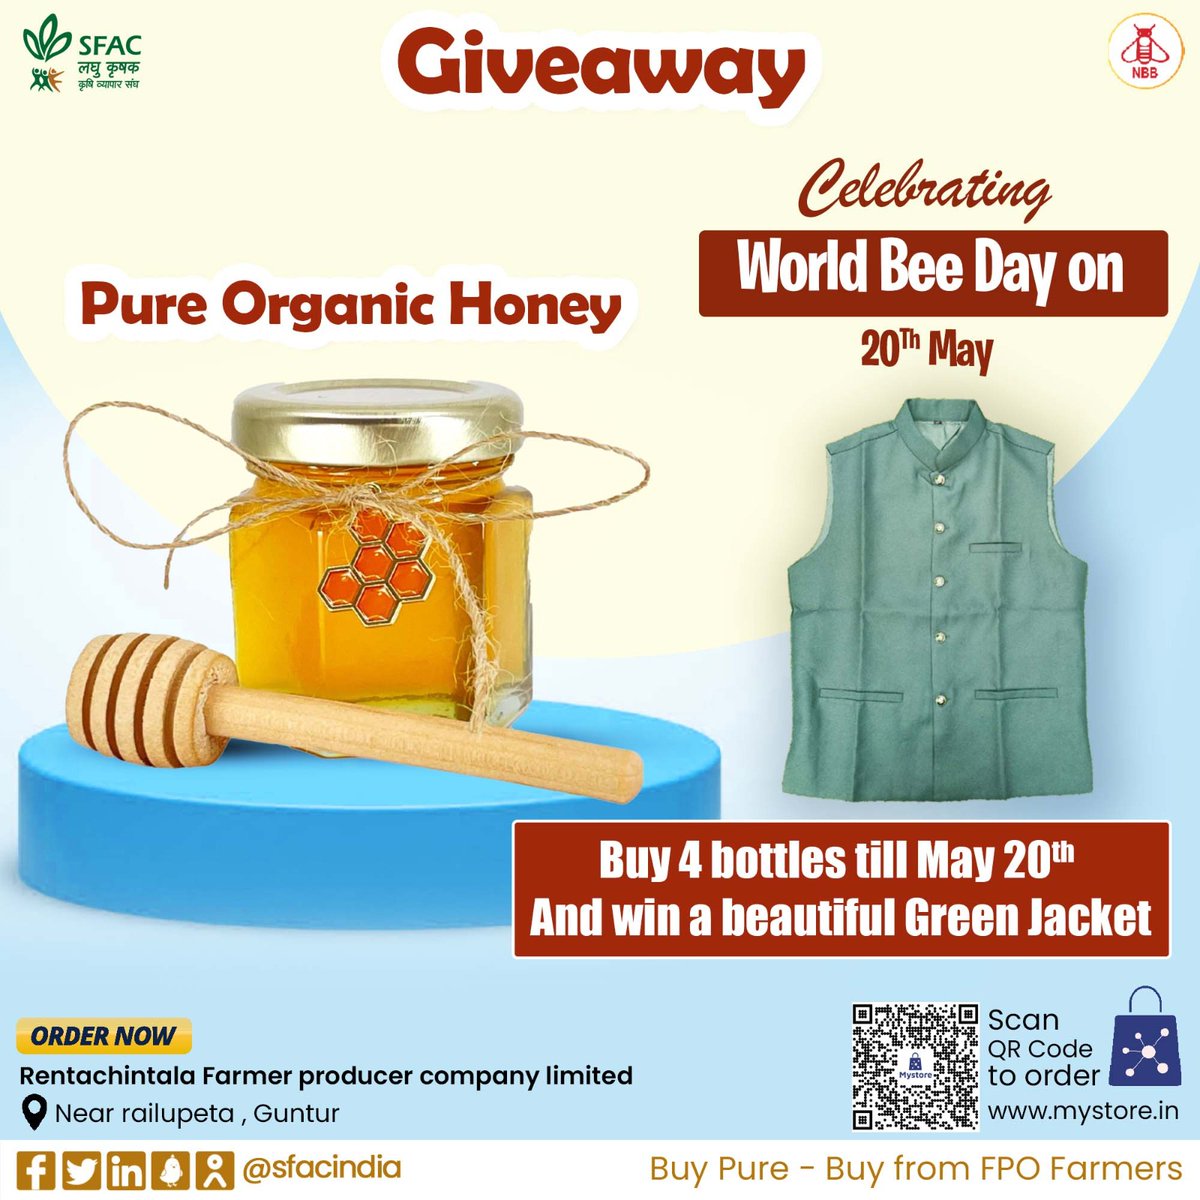 Giveaway🎁on World Bee Day Unfiltered, pure organic honey for the natural sweetness that is good for your health. Buy 4 bottles of honey till May 20th And win a beautiful Green Jacket. Order at👇 mystore.in/en/product/dba… 🐝 #VocalForLocal #healthychoices #healthyeating #NBB